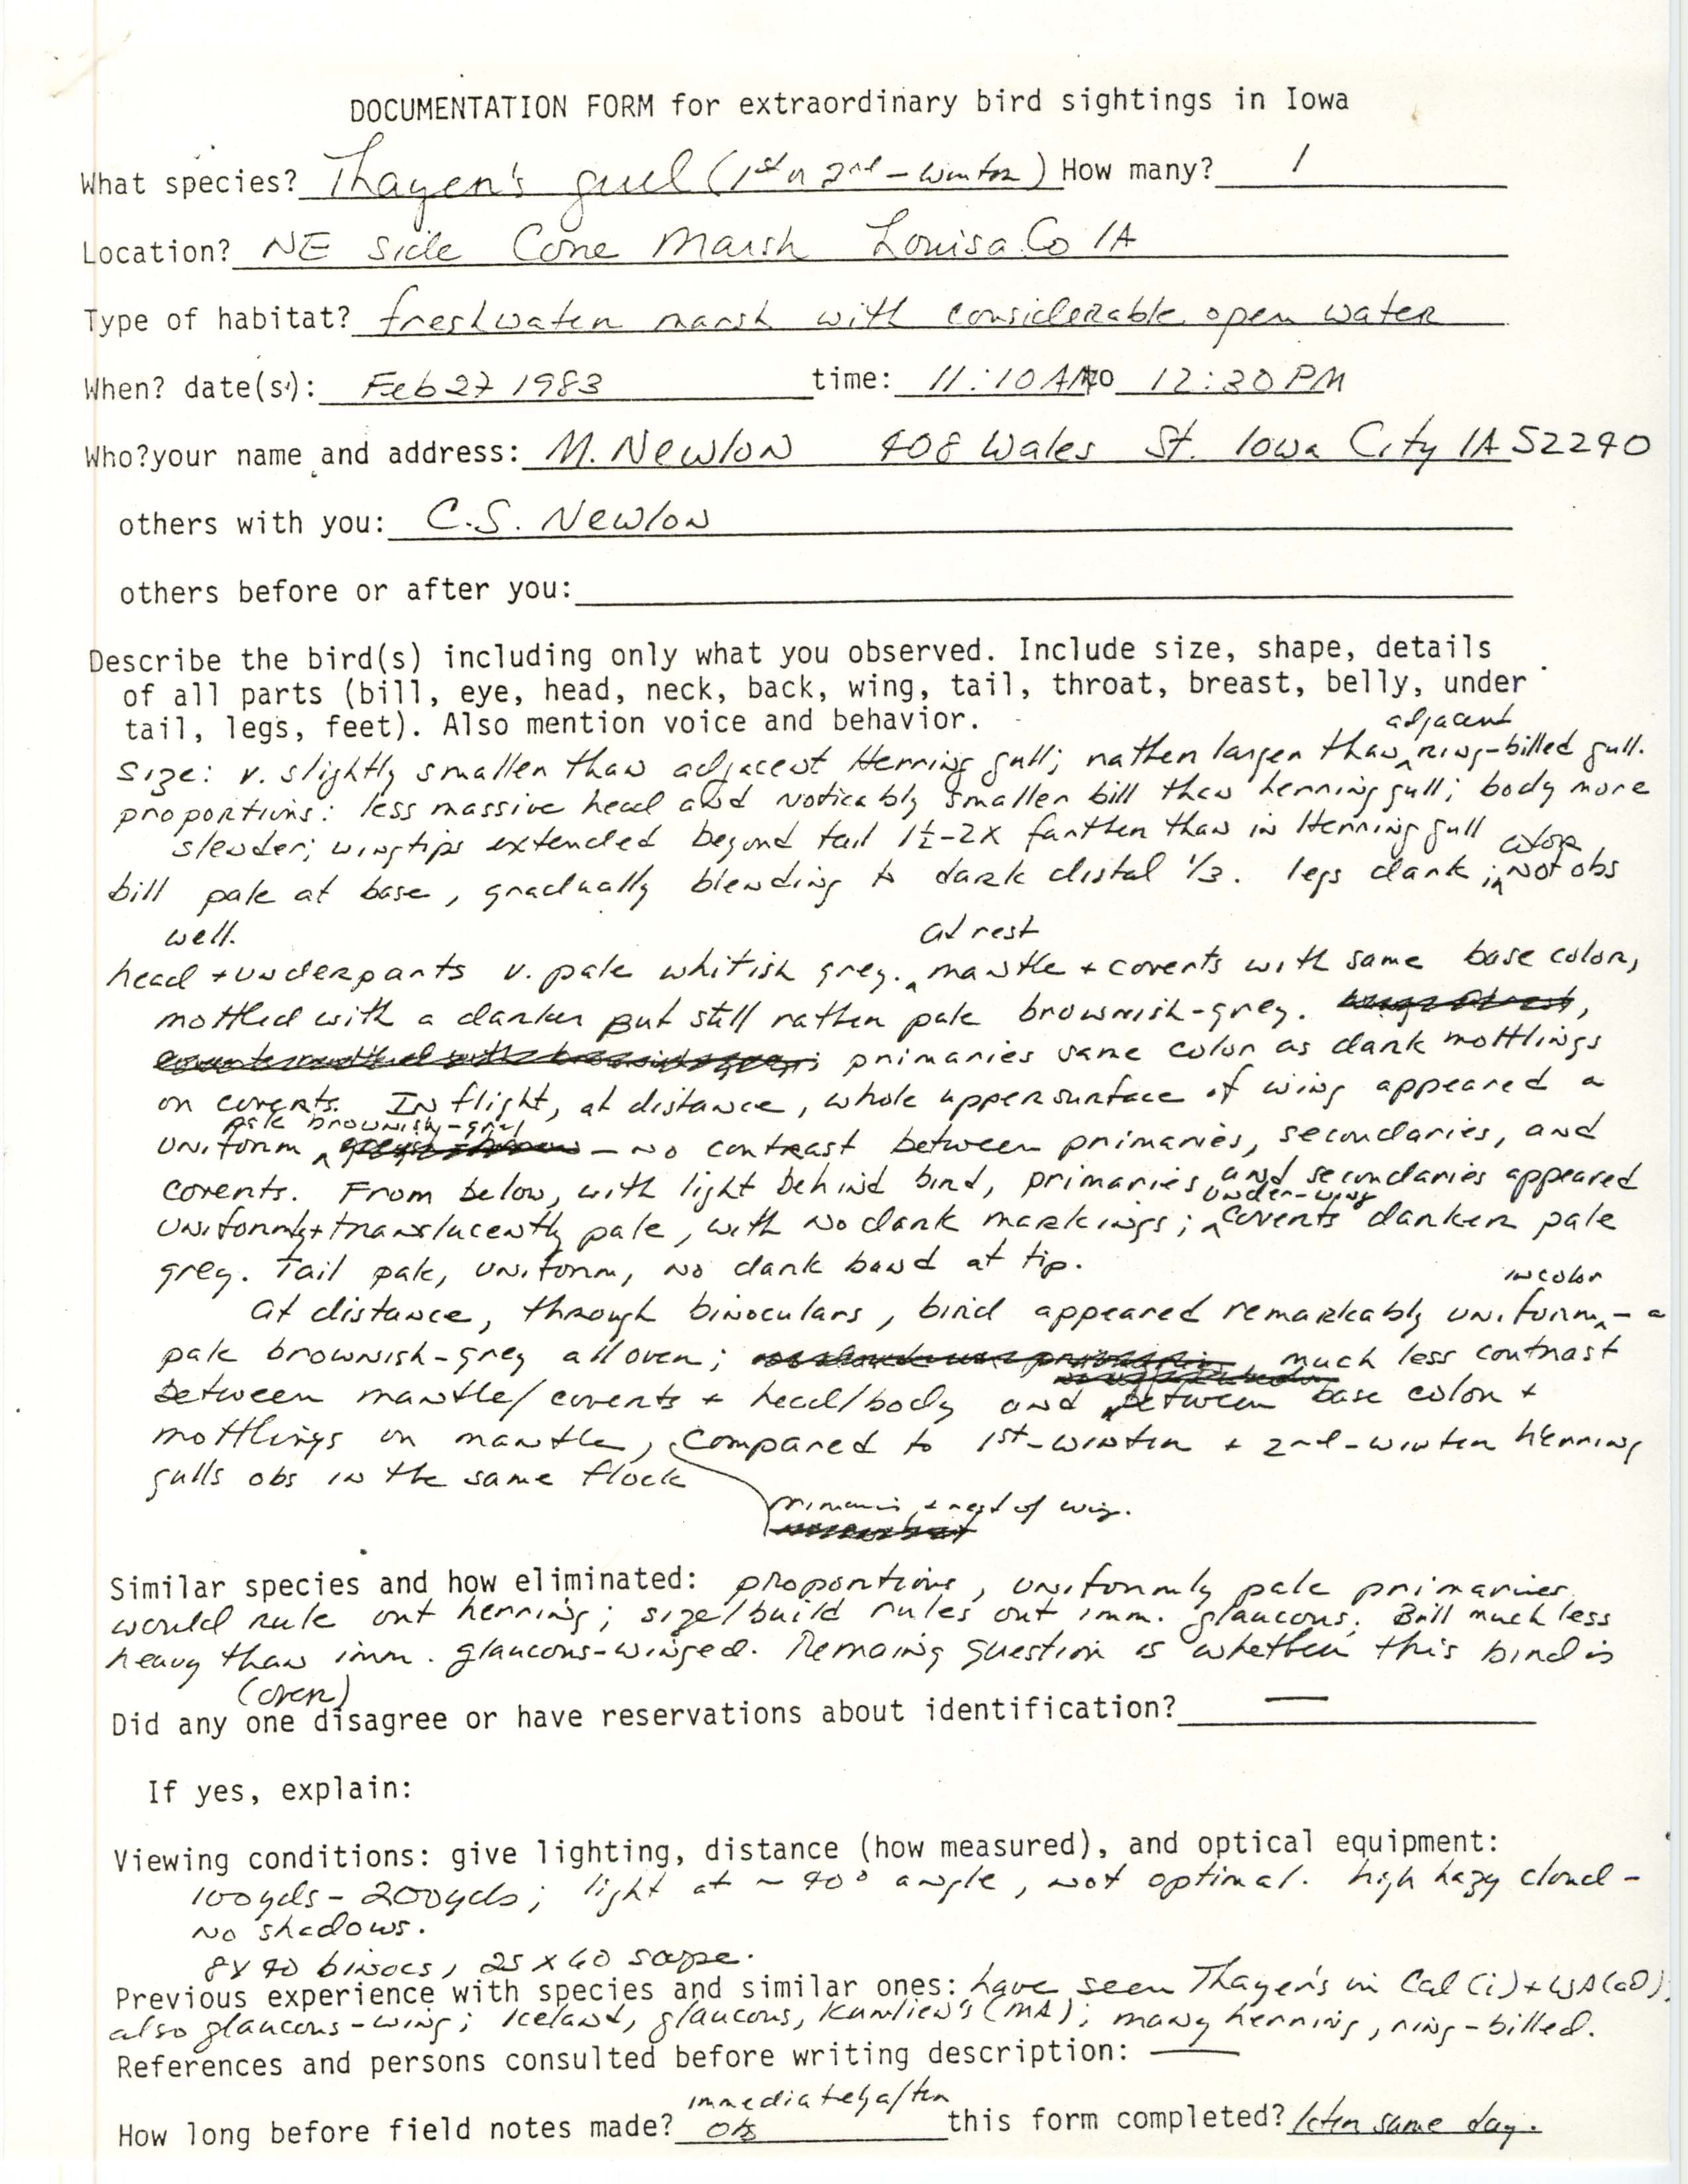 Rare bird documentation form for Thayer's Gull at Cone Marsh, 1983